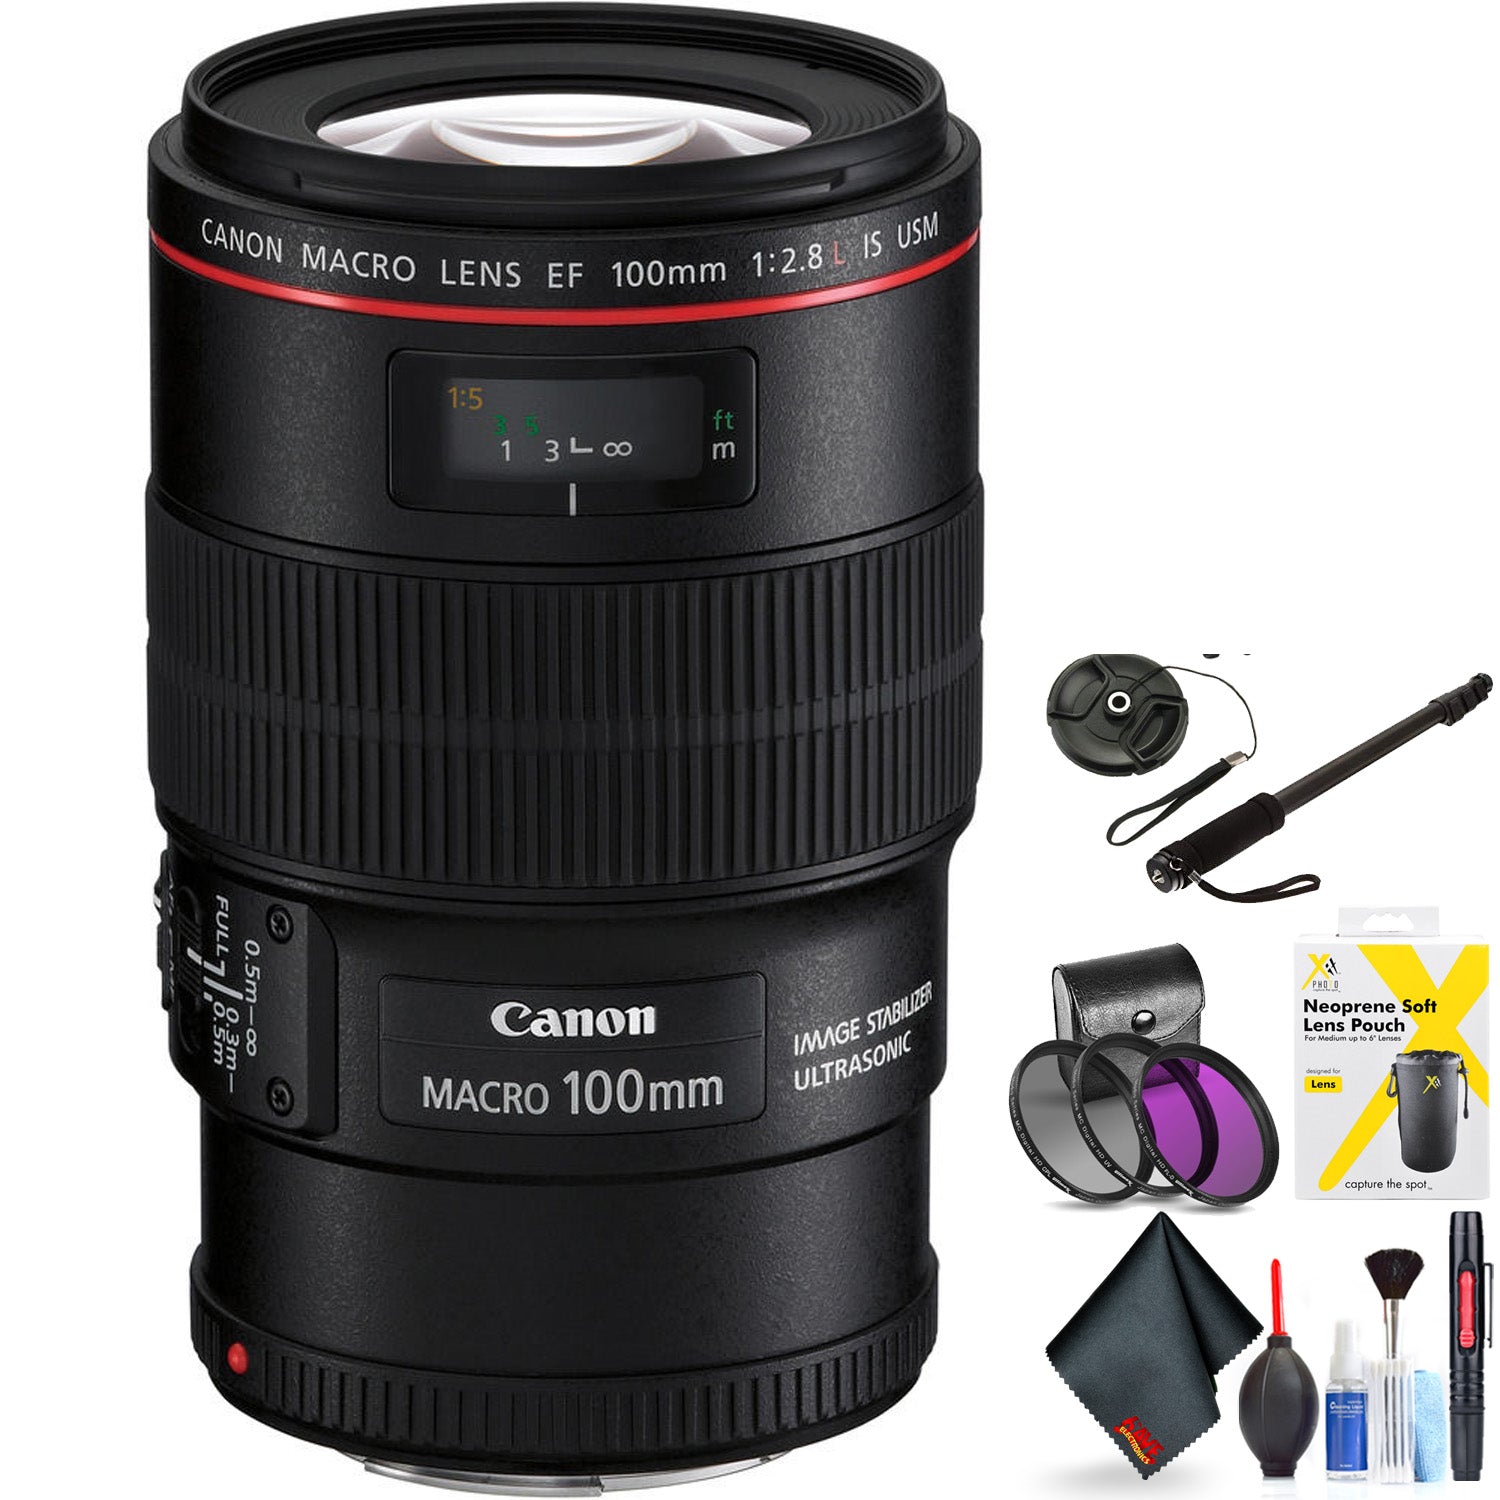 Canon EF 100mm F/2.8L Macro is USM Lens for Canon 6D, 5D Mark IV, 5D Mark III, 5D Mark II, 6D Mark II, 5Dsr, 5Ds, 1Dx, 1